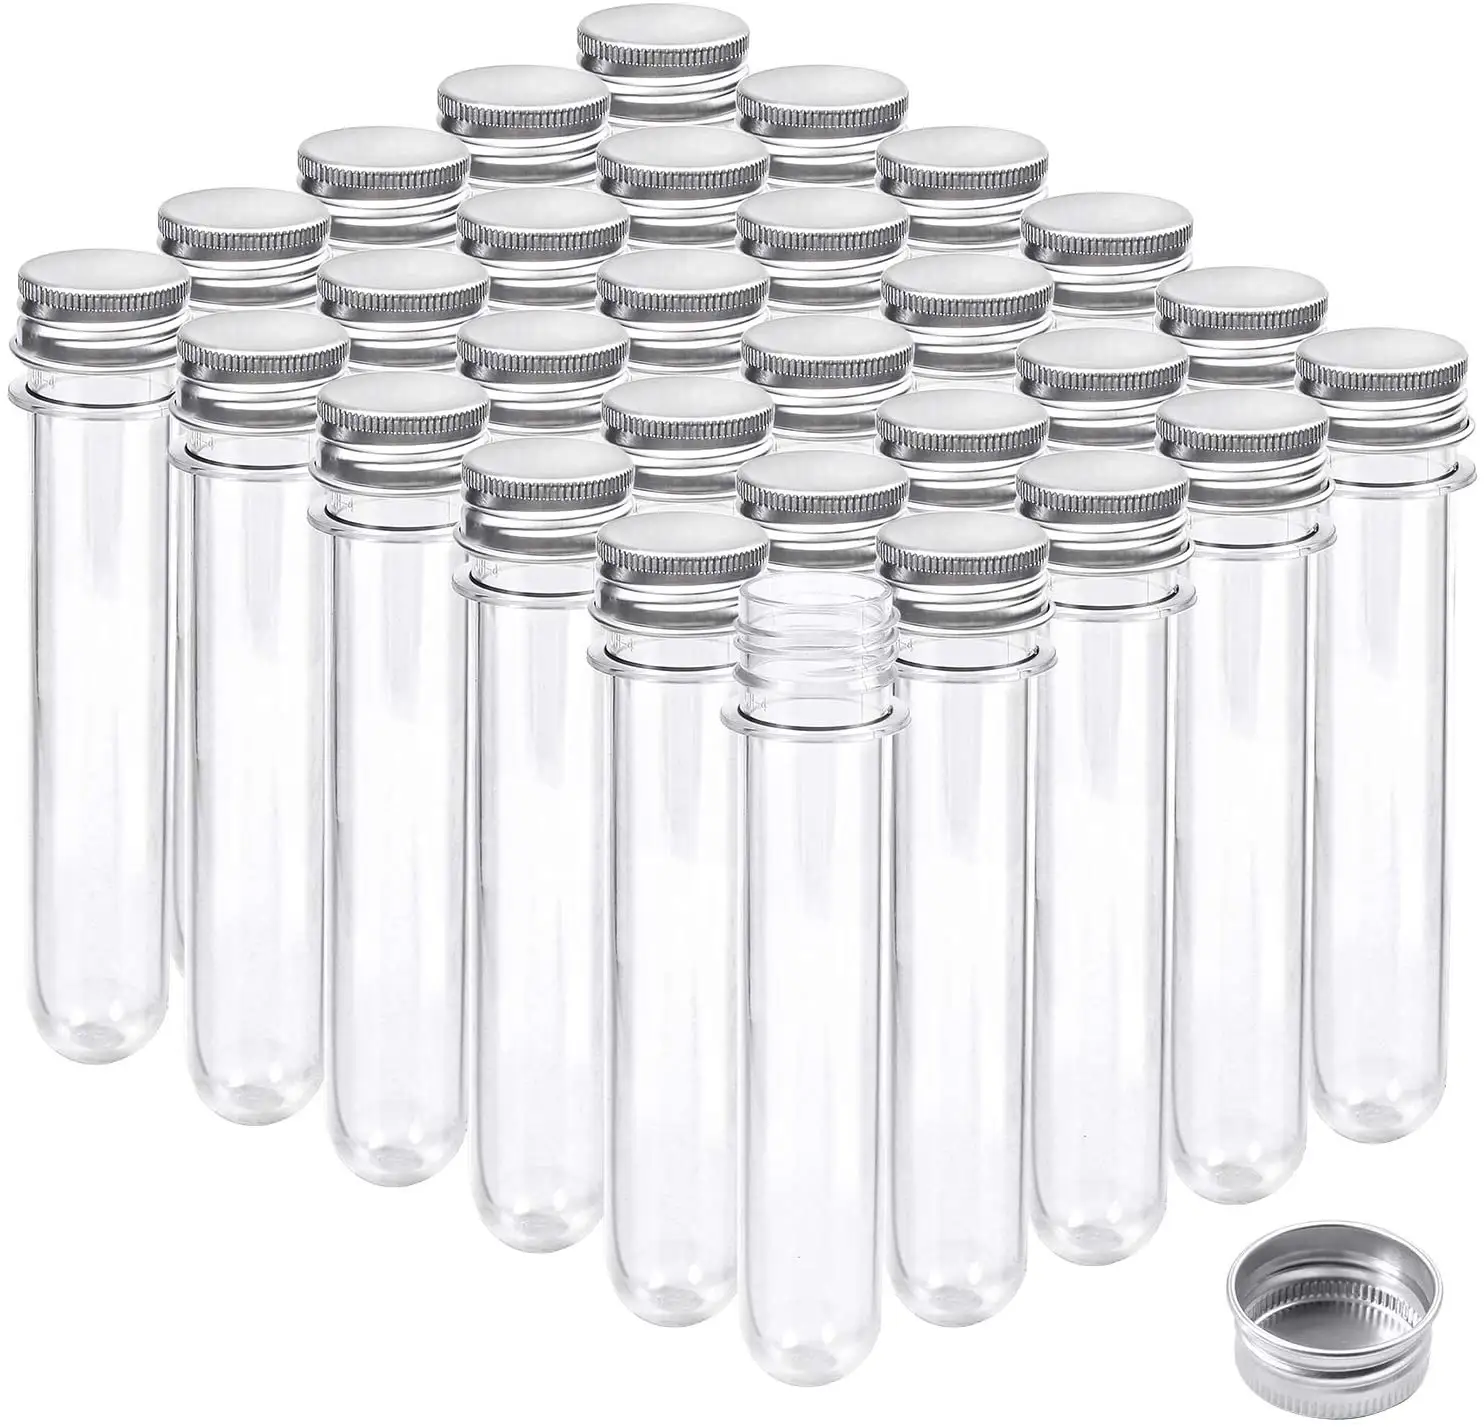 clear glass test tubes 18*180 mm size experiments party storage containers kitchen bath salt vials container kit